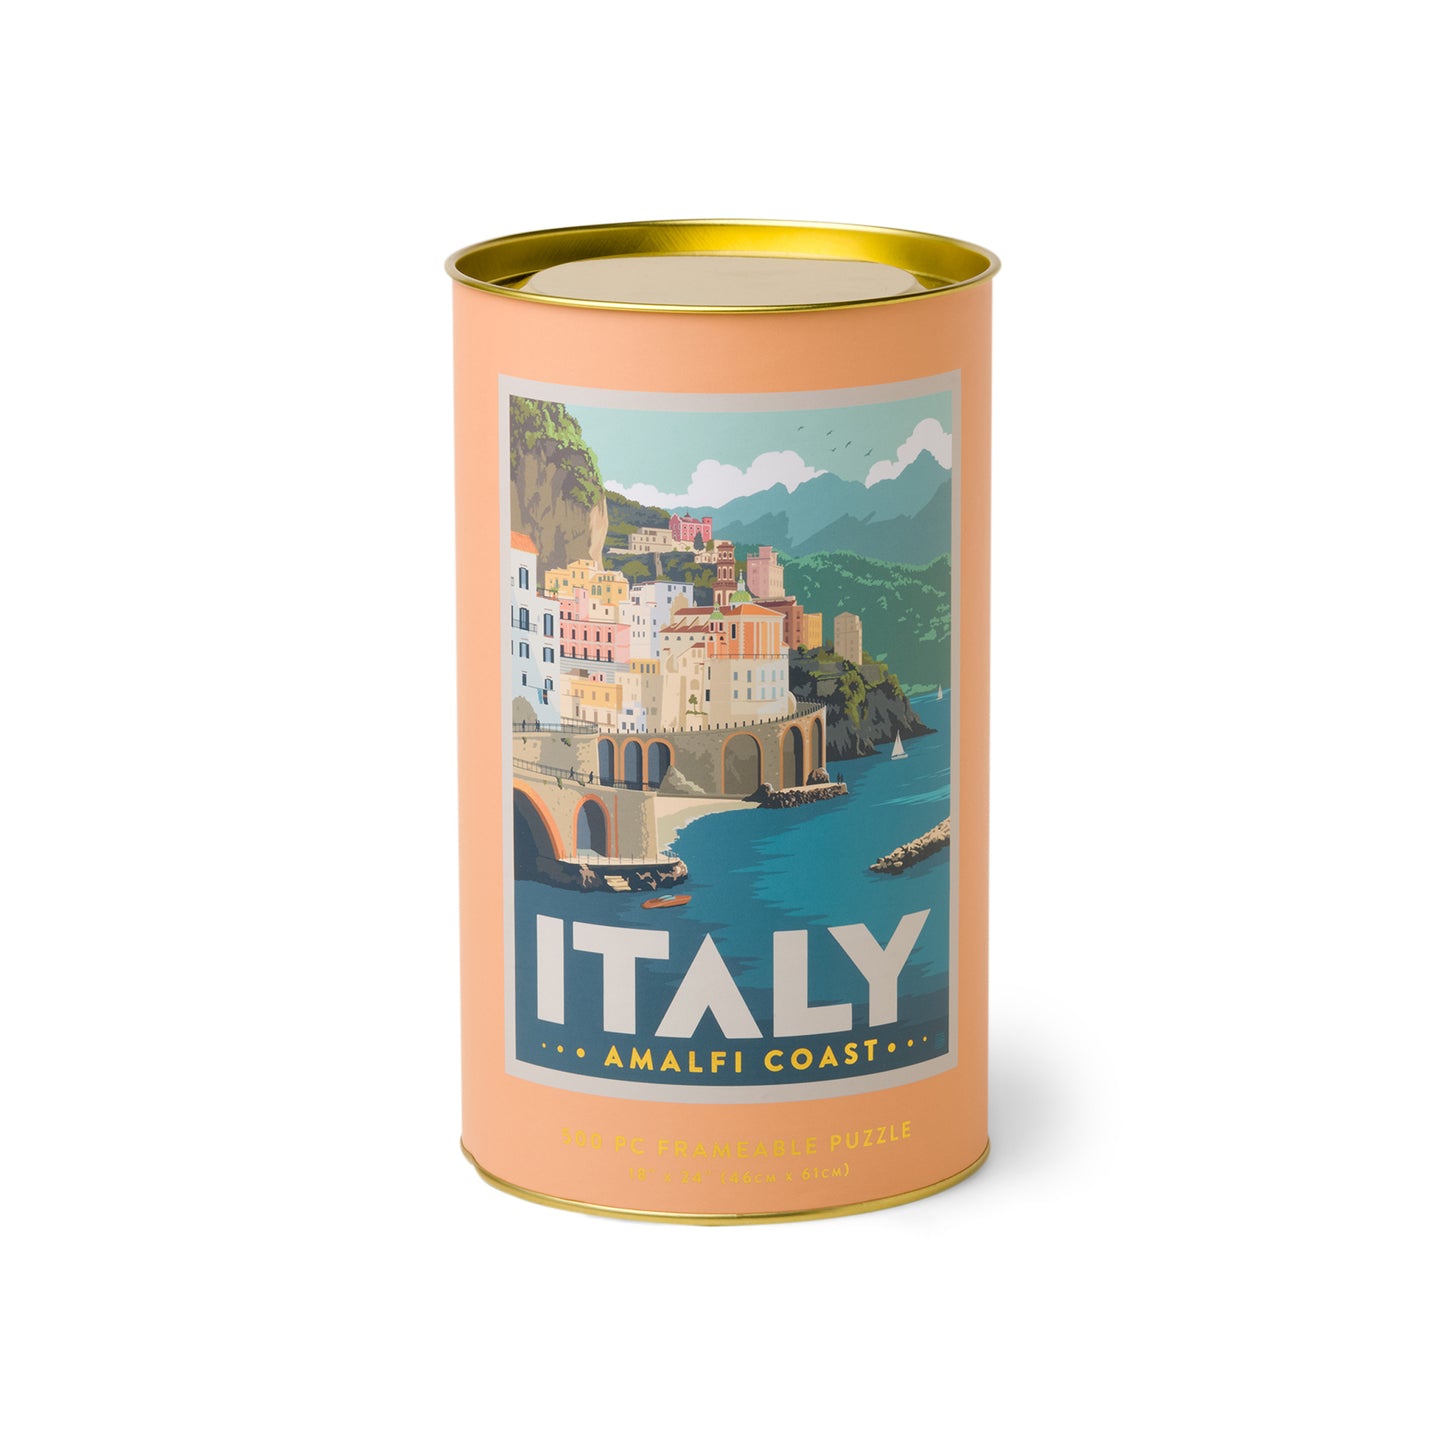 Italy - puzzle in a tube | Designworks Ink